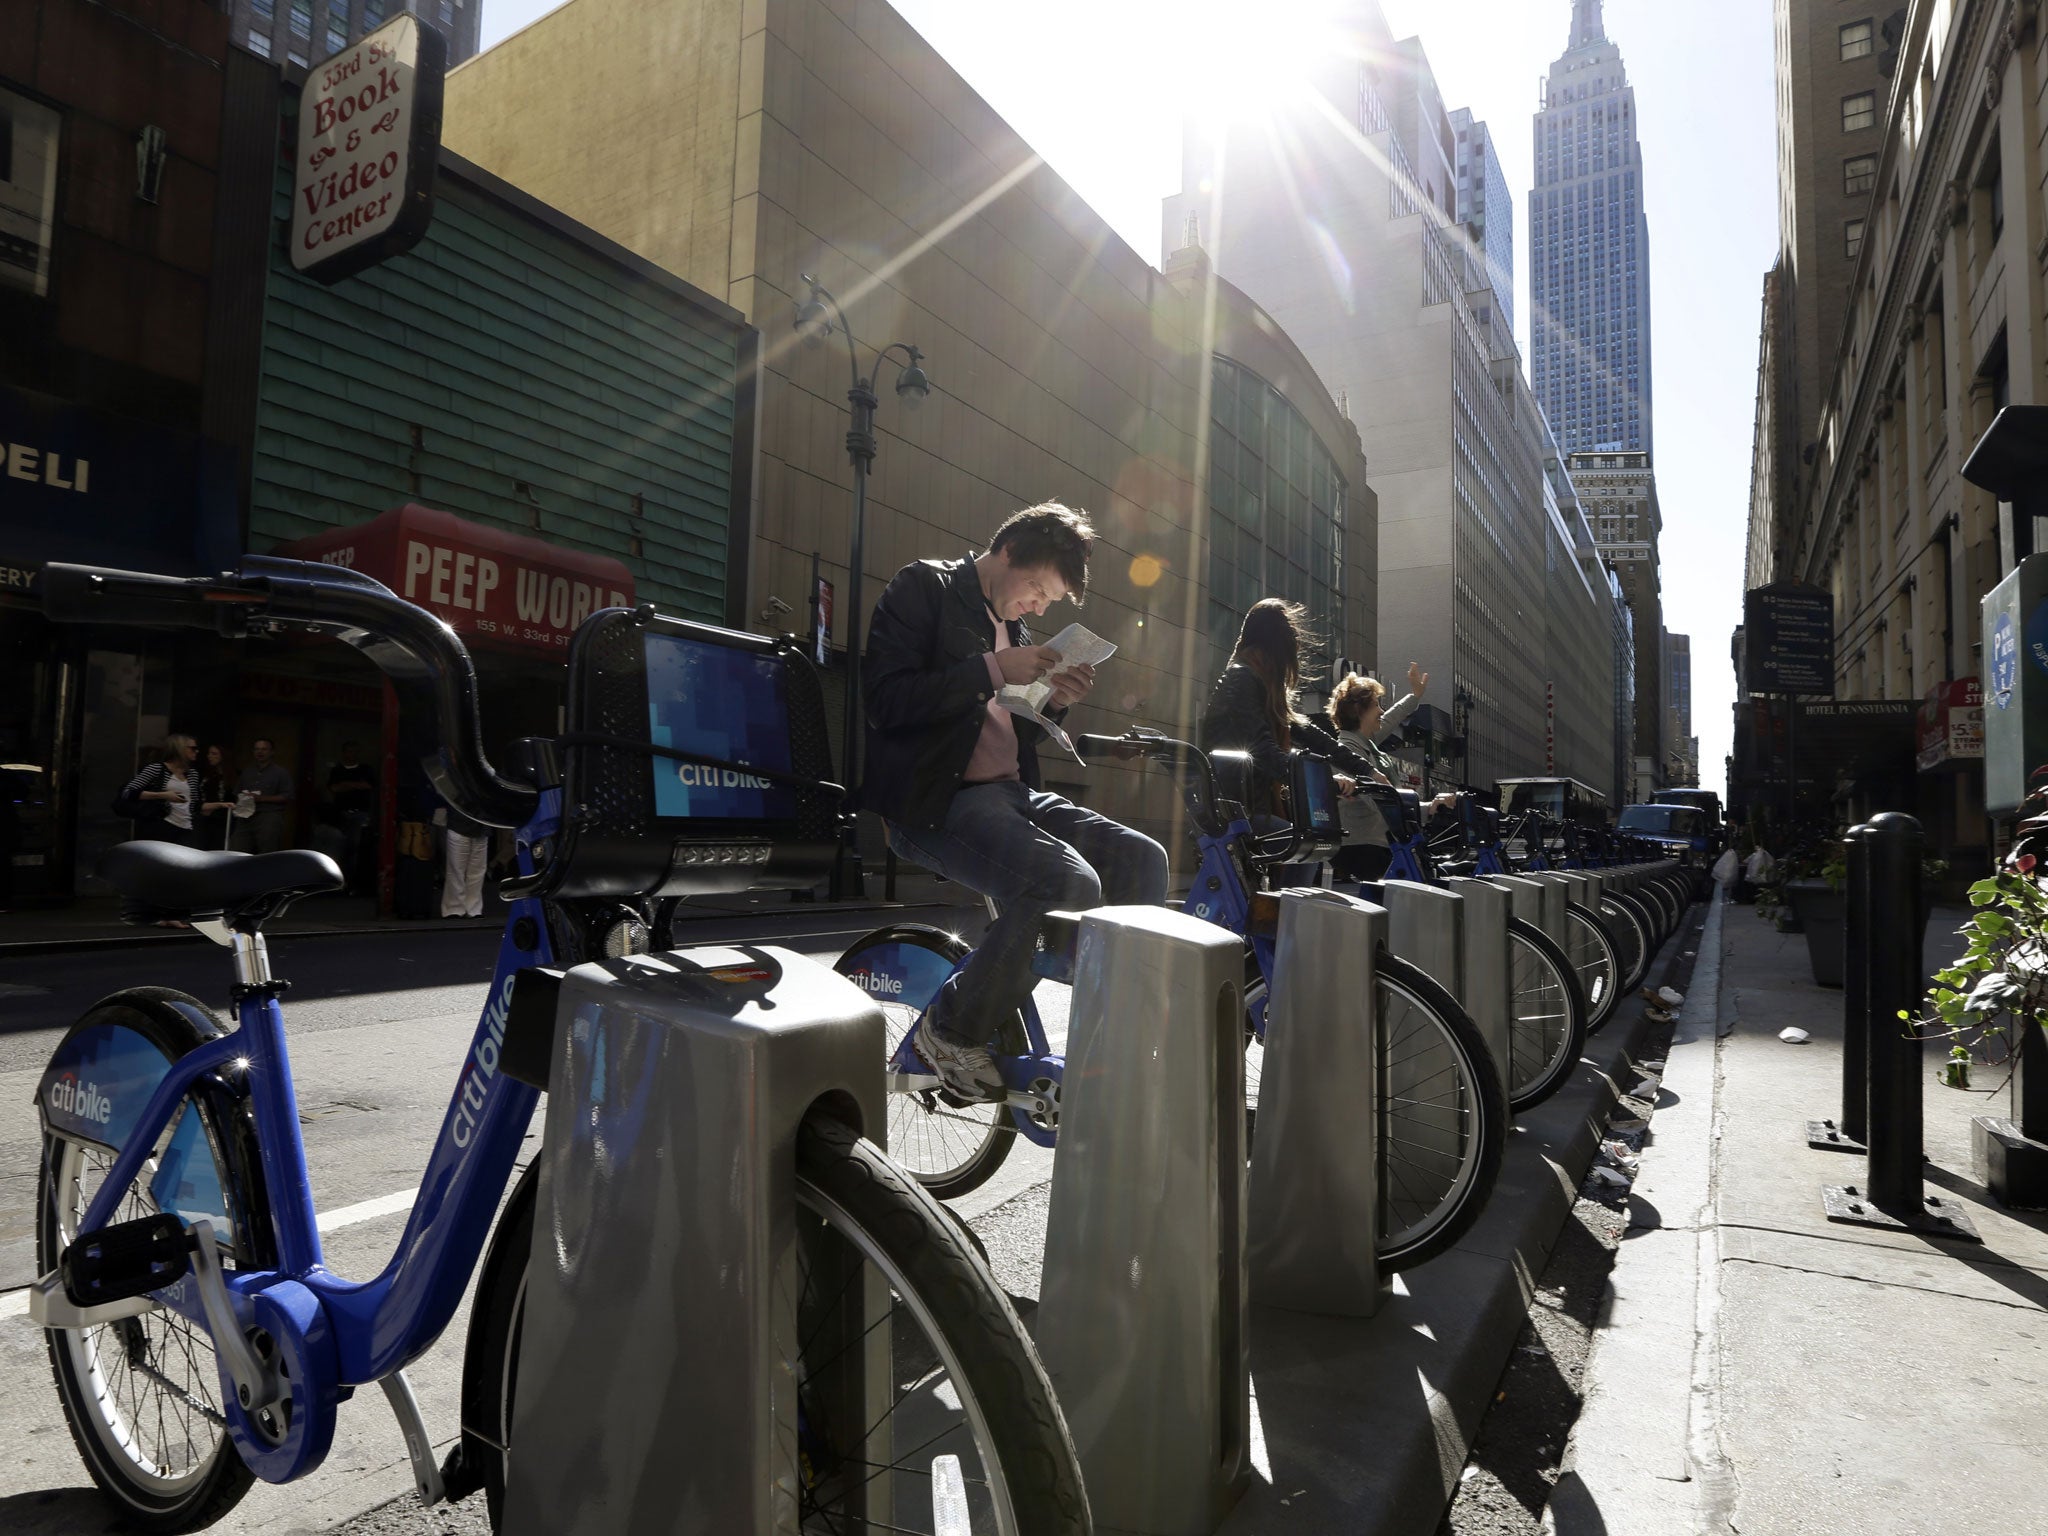 More than 9,000 New Yorkers have signed up to take part in the Citi Bike scheme